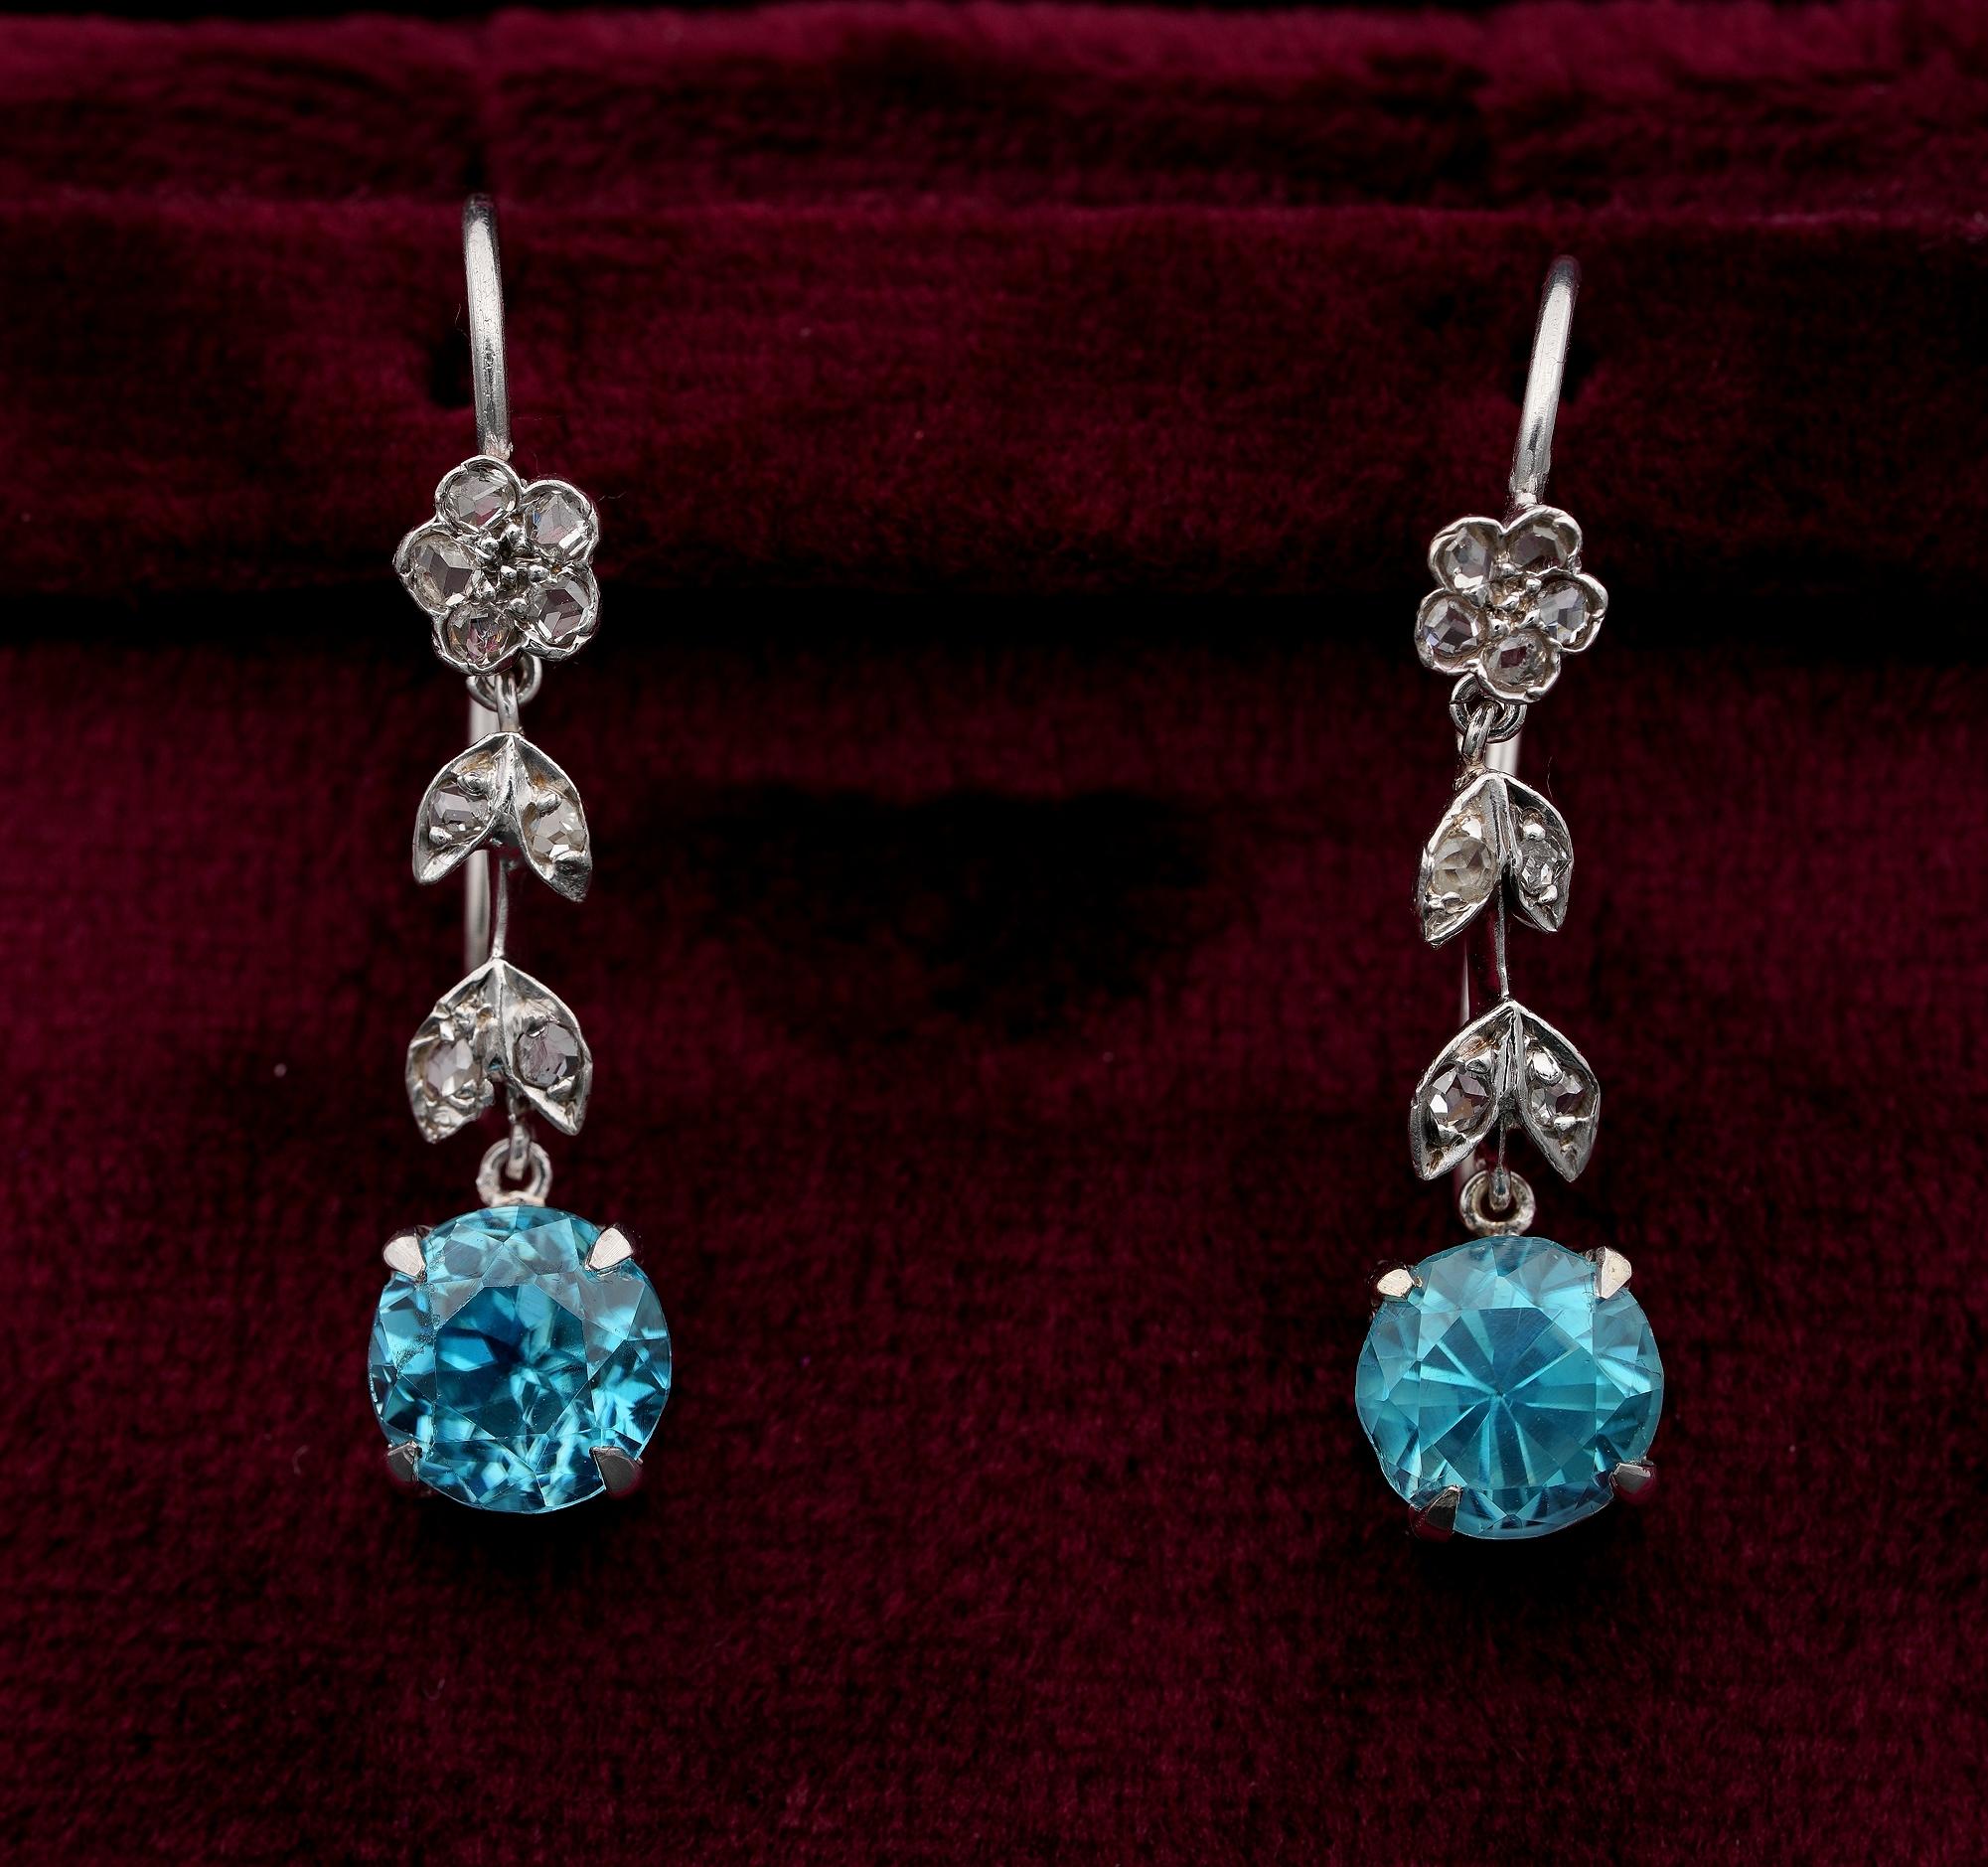 Pretty Blue
The prettiest Art Deco Blue Zircon drop earrings finely hand crafted of Platinum
Top tiny flower in a line of sweet leaf work leads to the main drop
Set with Rose Cut Diamonds approx .36 Ct, bright white and sparkly
Wonderful Natural